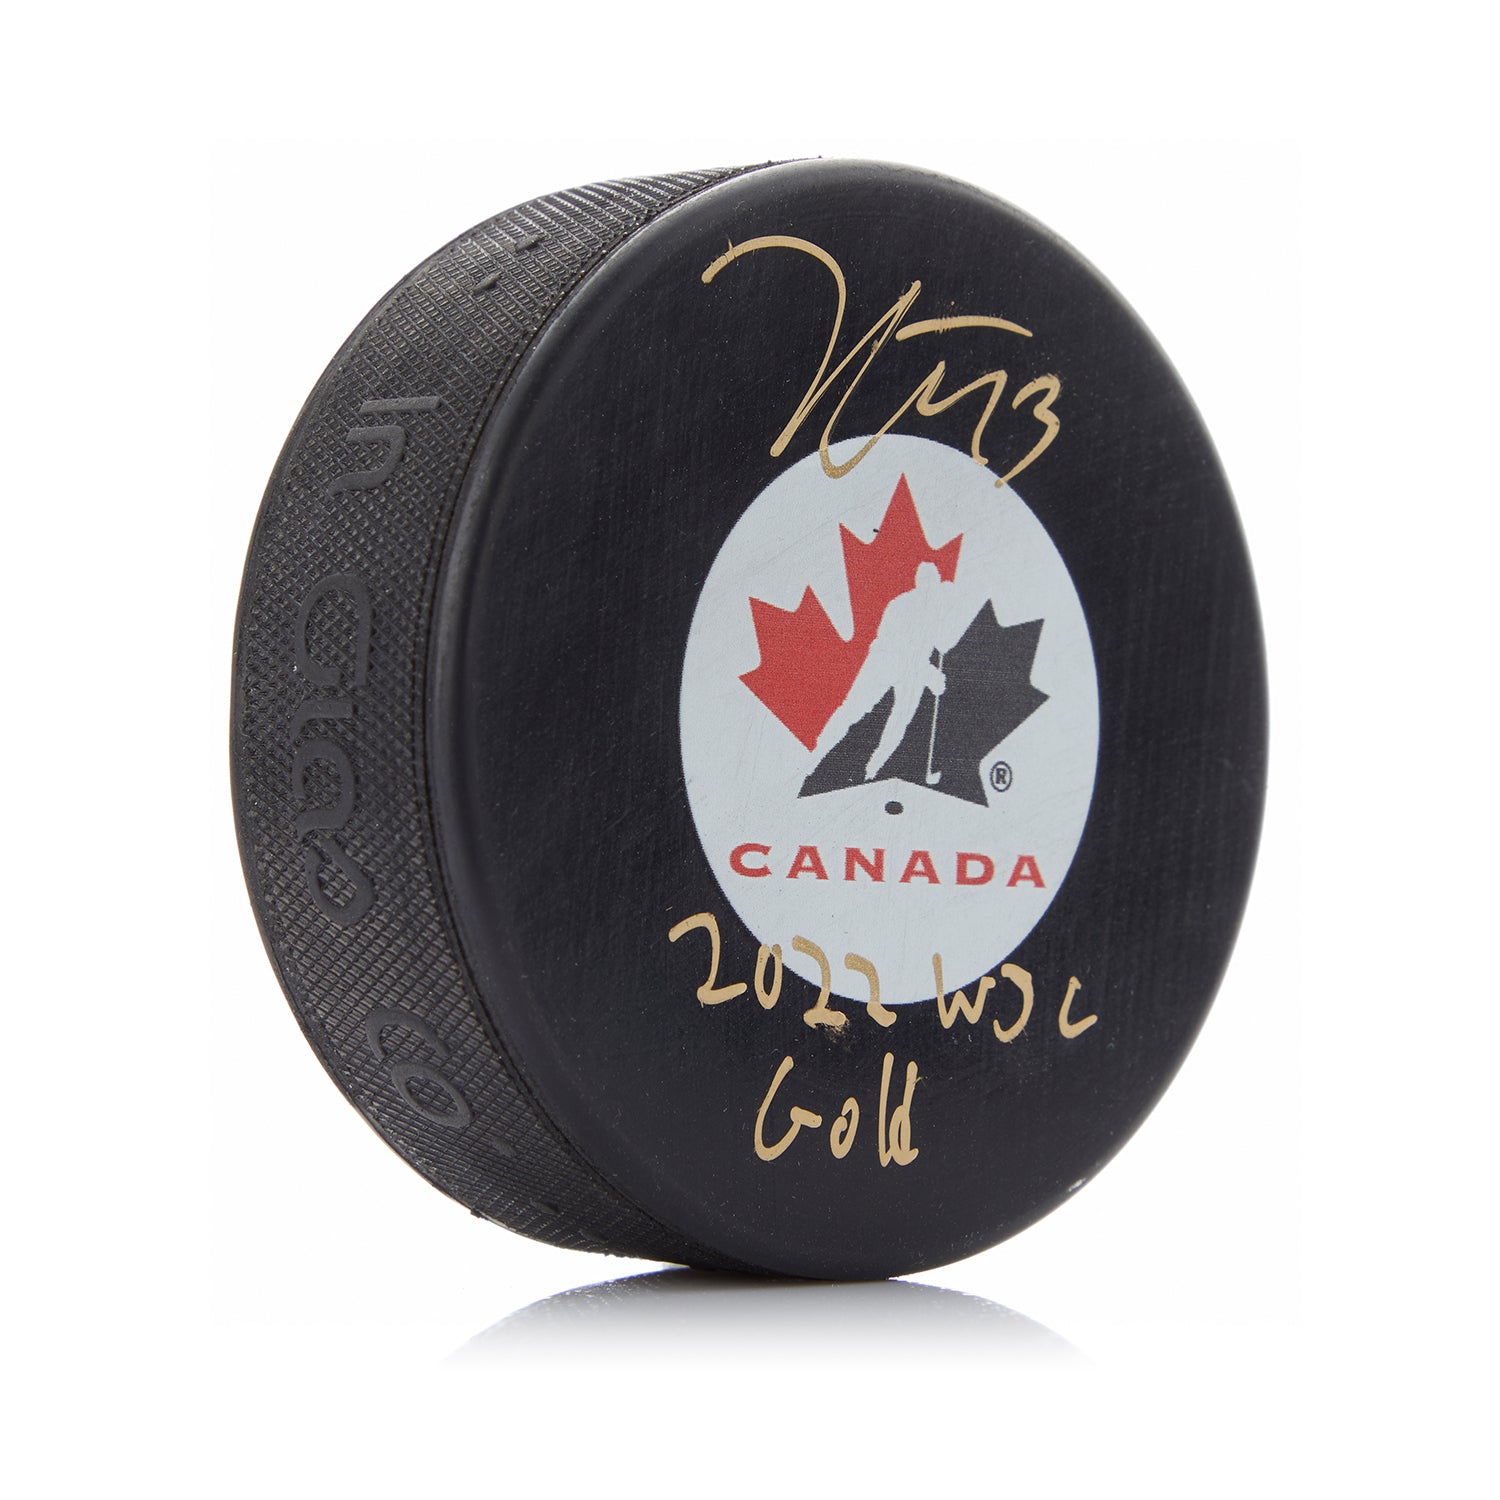 Kent Johnson Autographed Team Canada Puck with WJC Gold Note